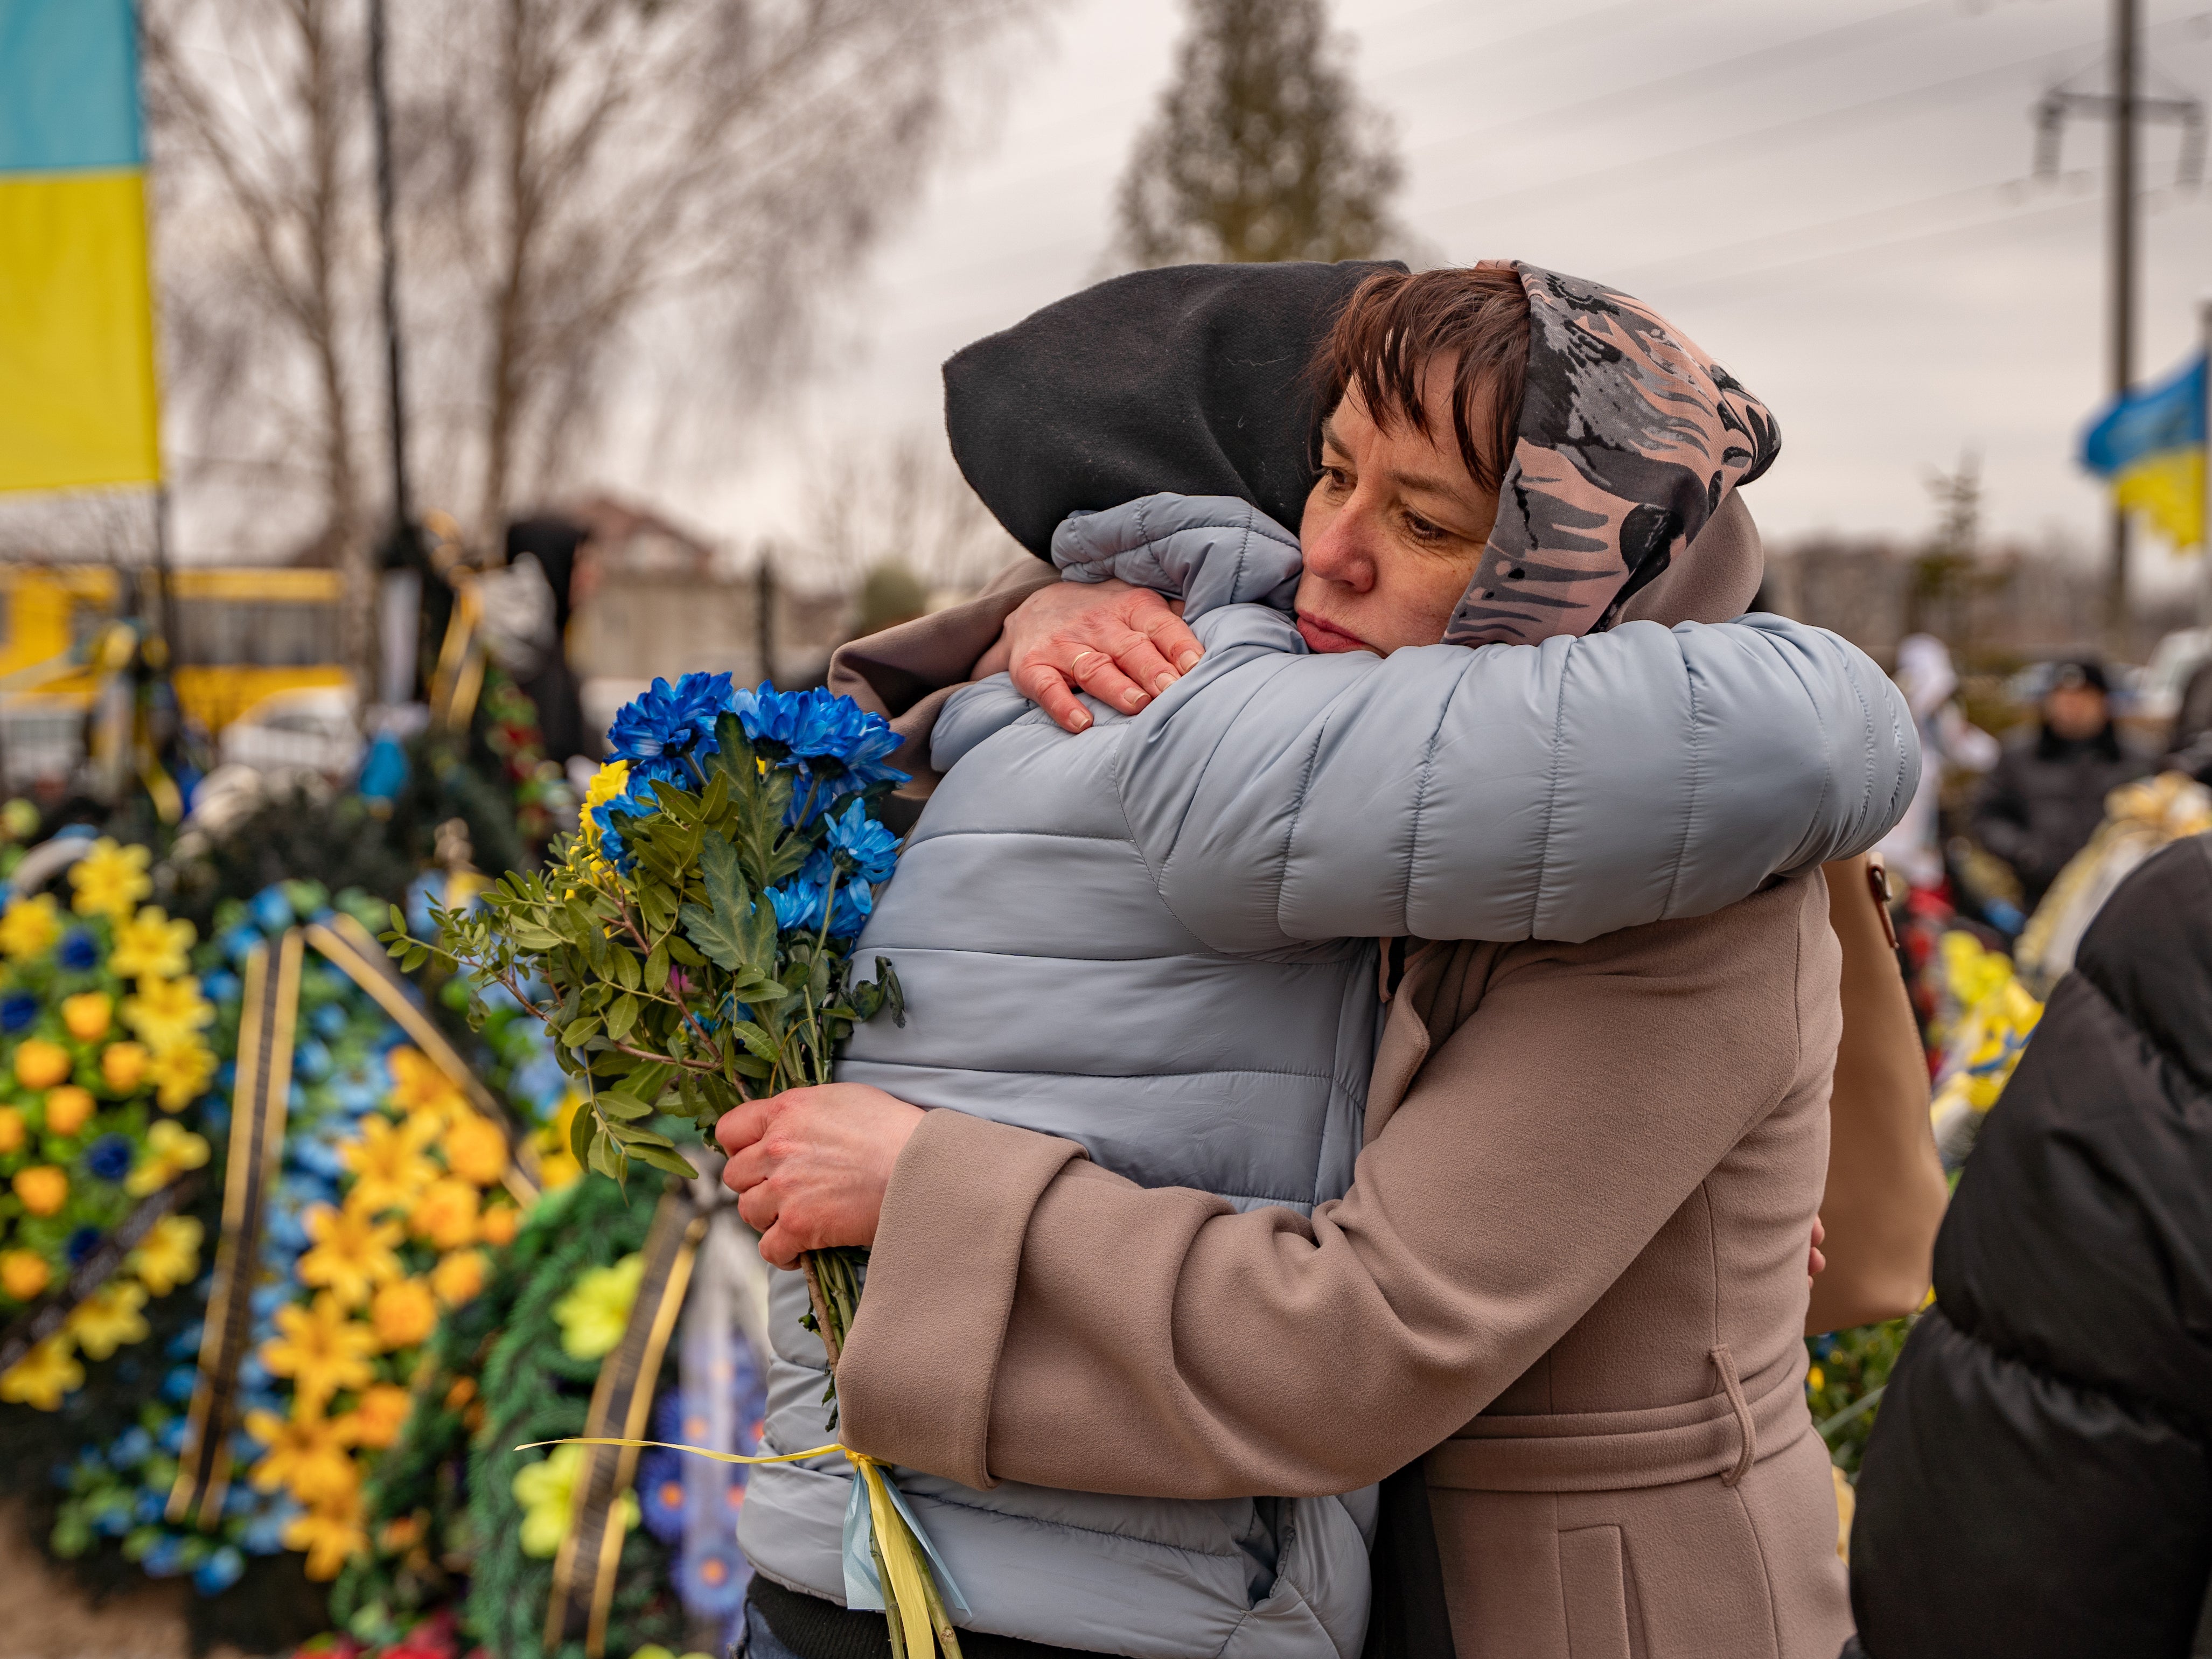 Tetiana, whose son died fighting in Bakhmut a few weeks ago, is hugged and comforted by a friend as they mark the one year anniversary of Russia’s invasion of Ukraine